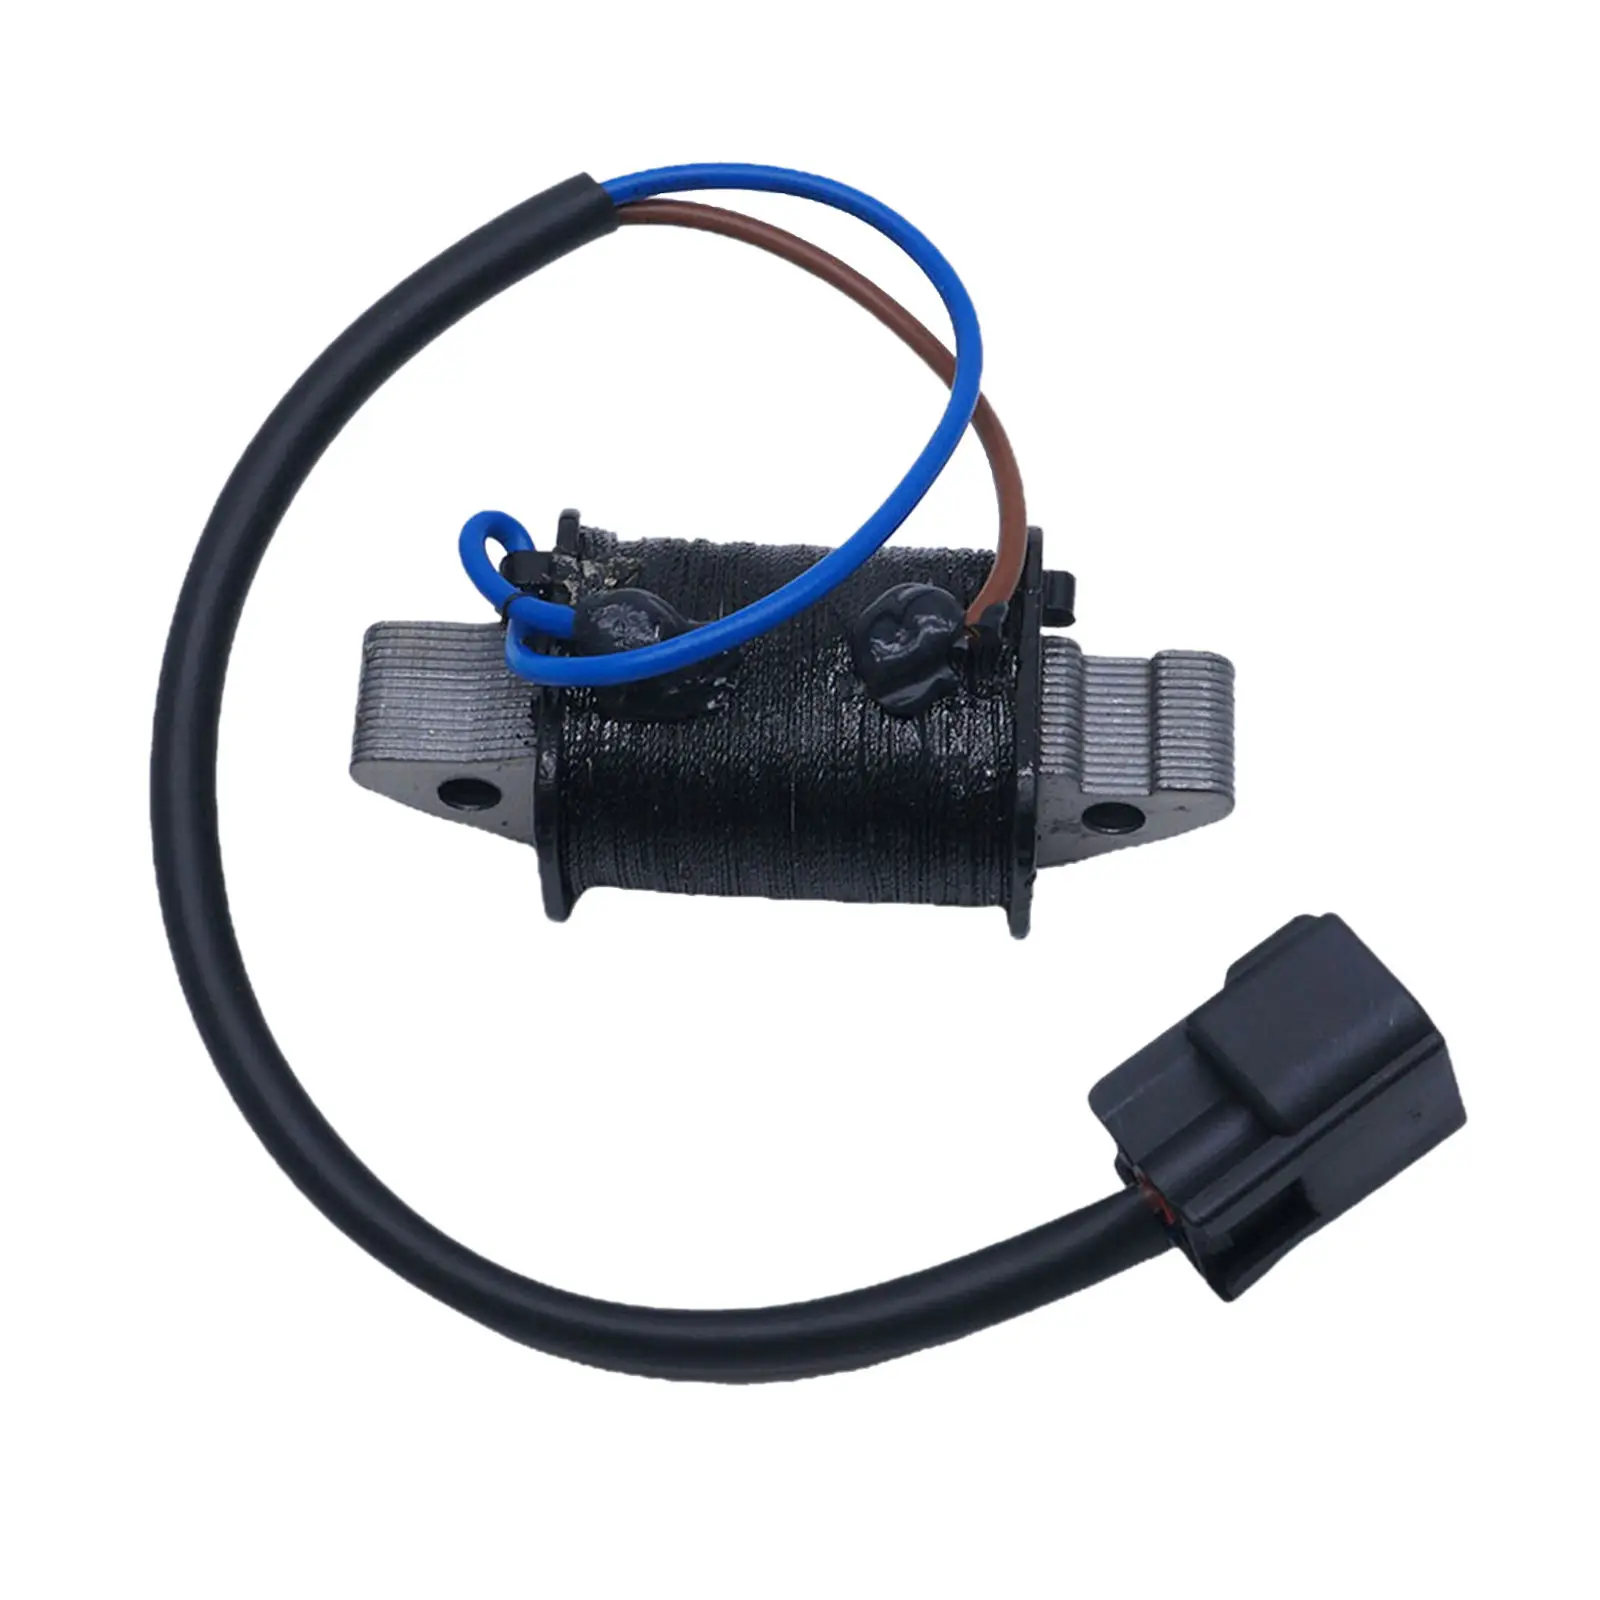 New Charge Coil for Yamaha Outboard Motor 70HP 60HP with Plug 6H2-85520-01-00, Perfect replacement for you old or broken part.